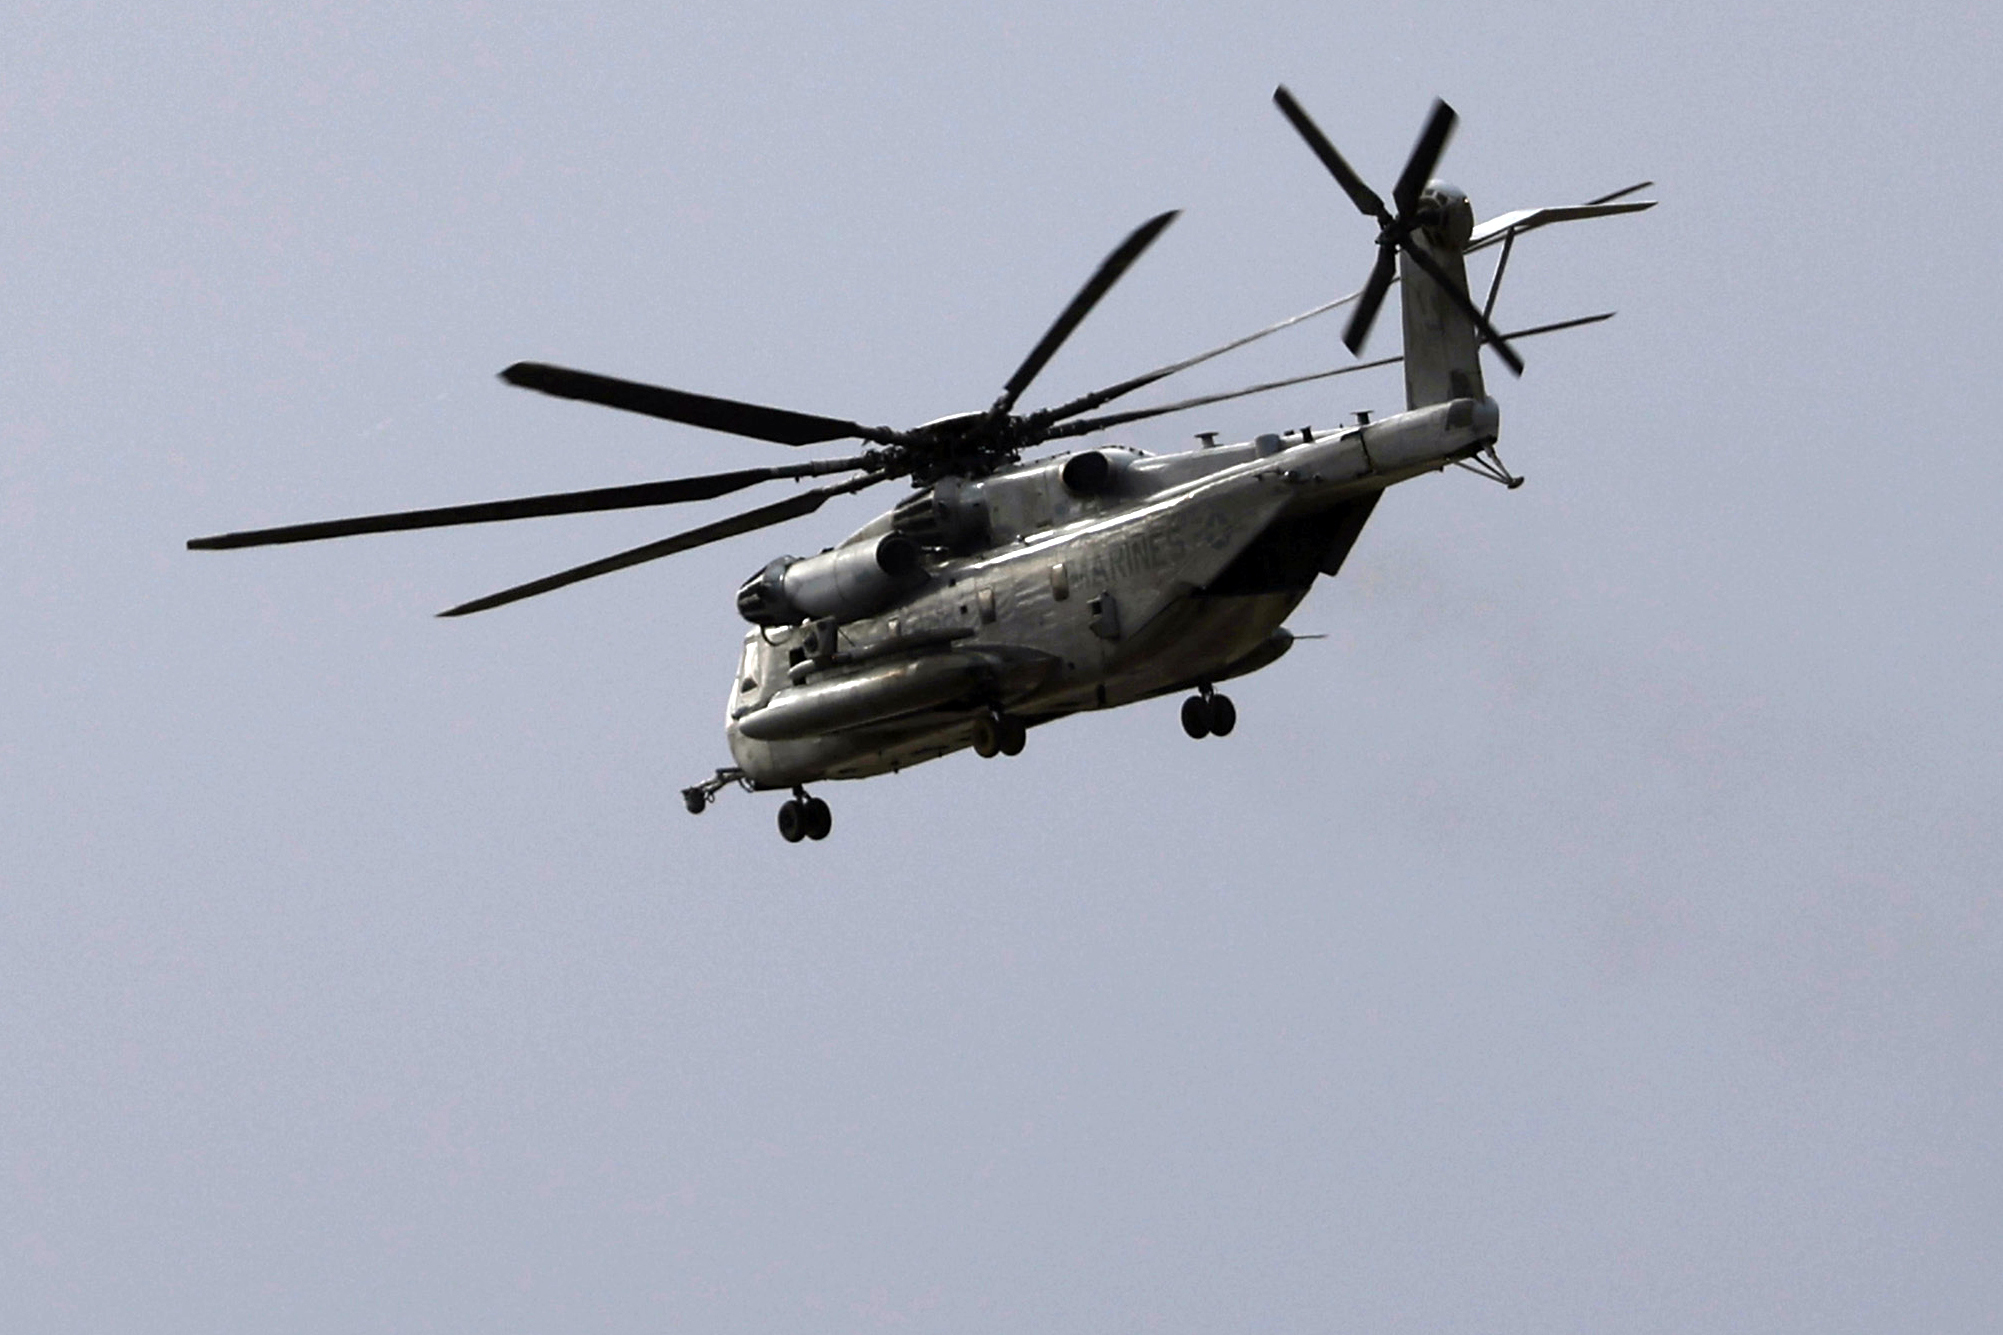 A Marine Corps CH-53E Super Stallion helicopter like the one pictured went missing late Tuesday and was discovered Wednesday in a mountainous area outside San Diego. All five troops aboard have been confirmed dead.